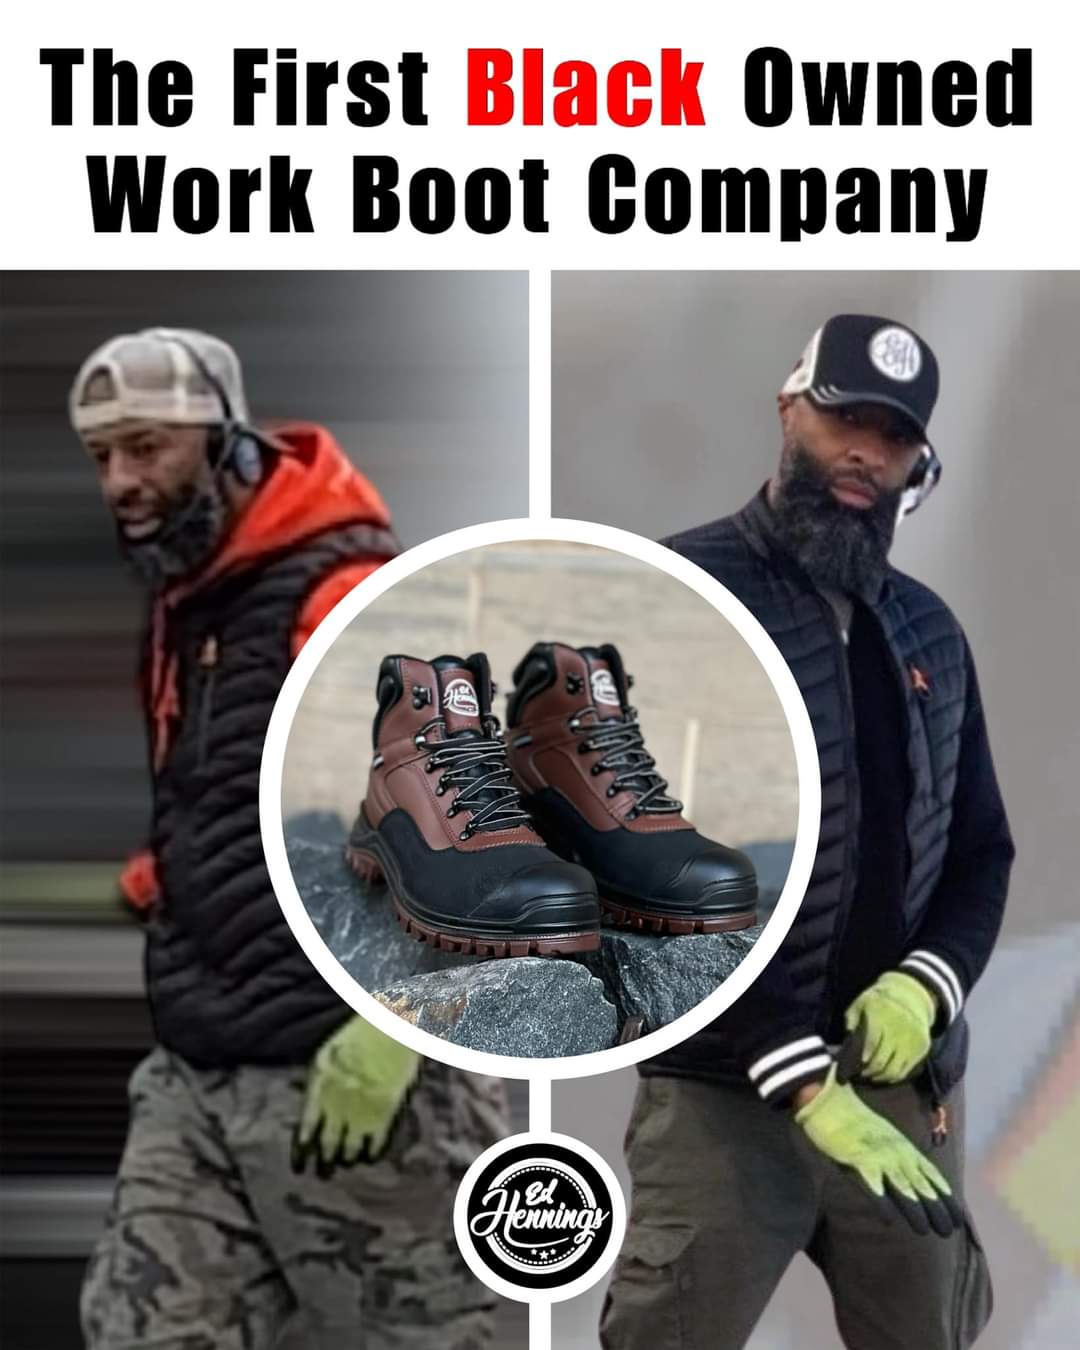 FIRST BLACK OWNED WORKBOOT COMPANY